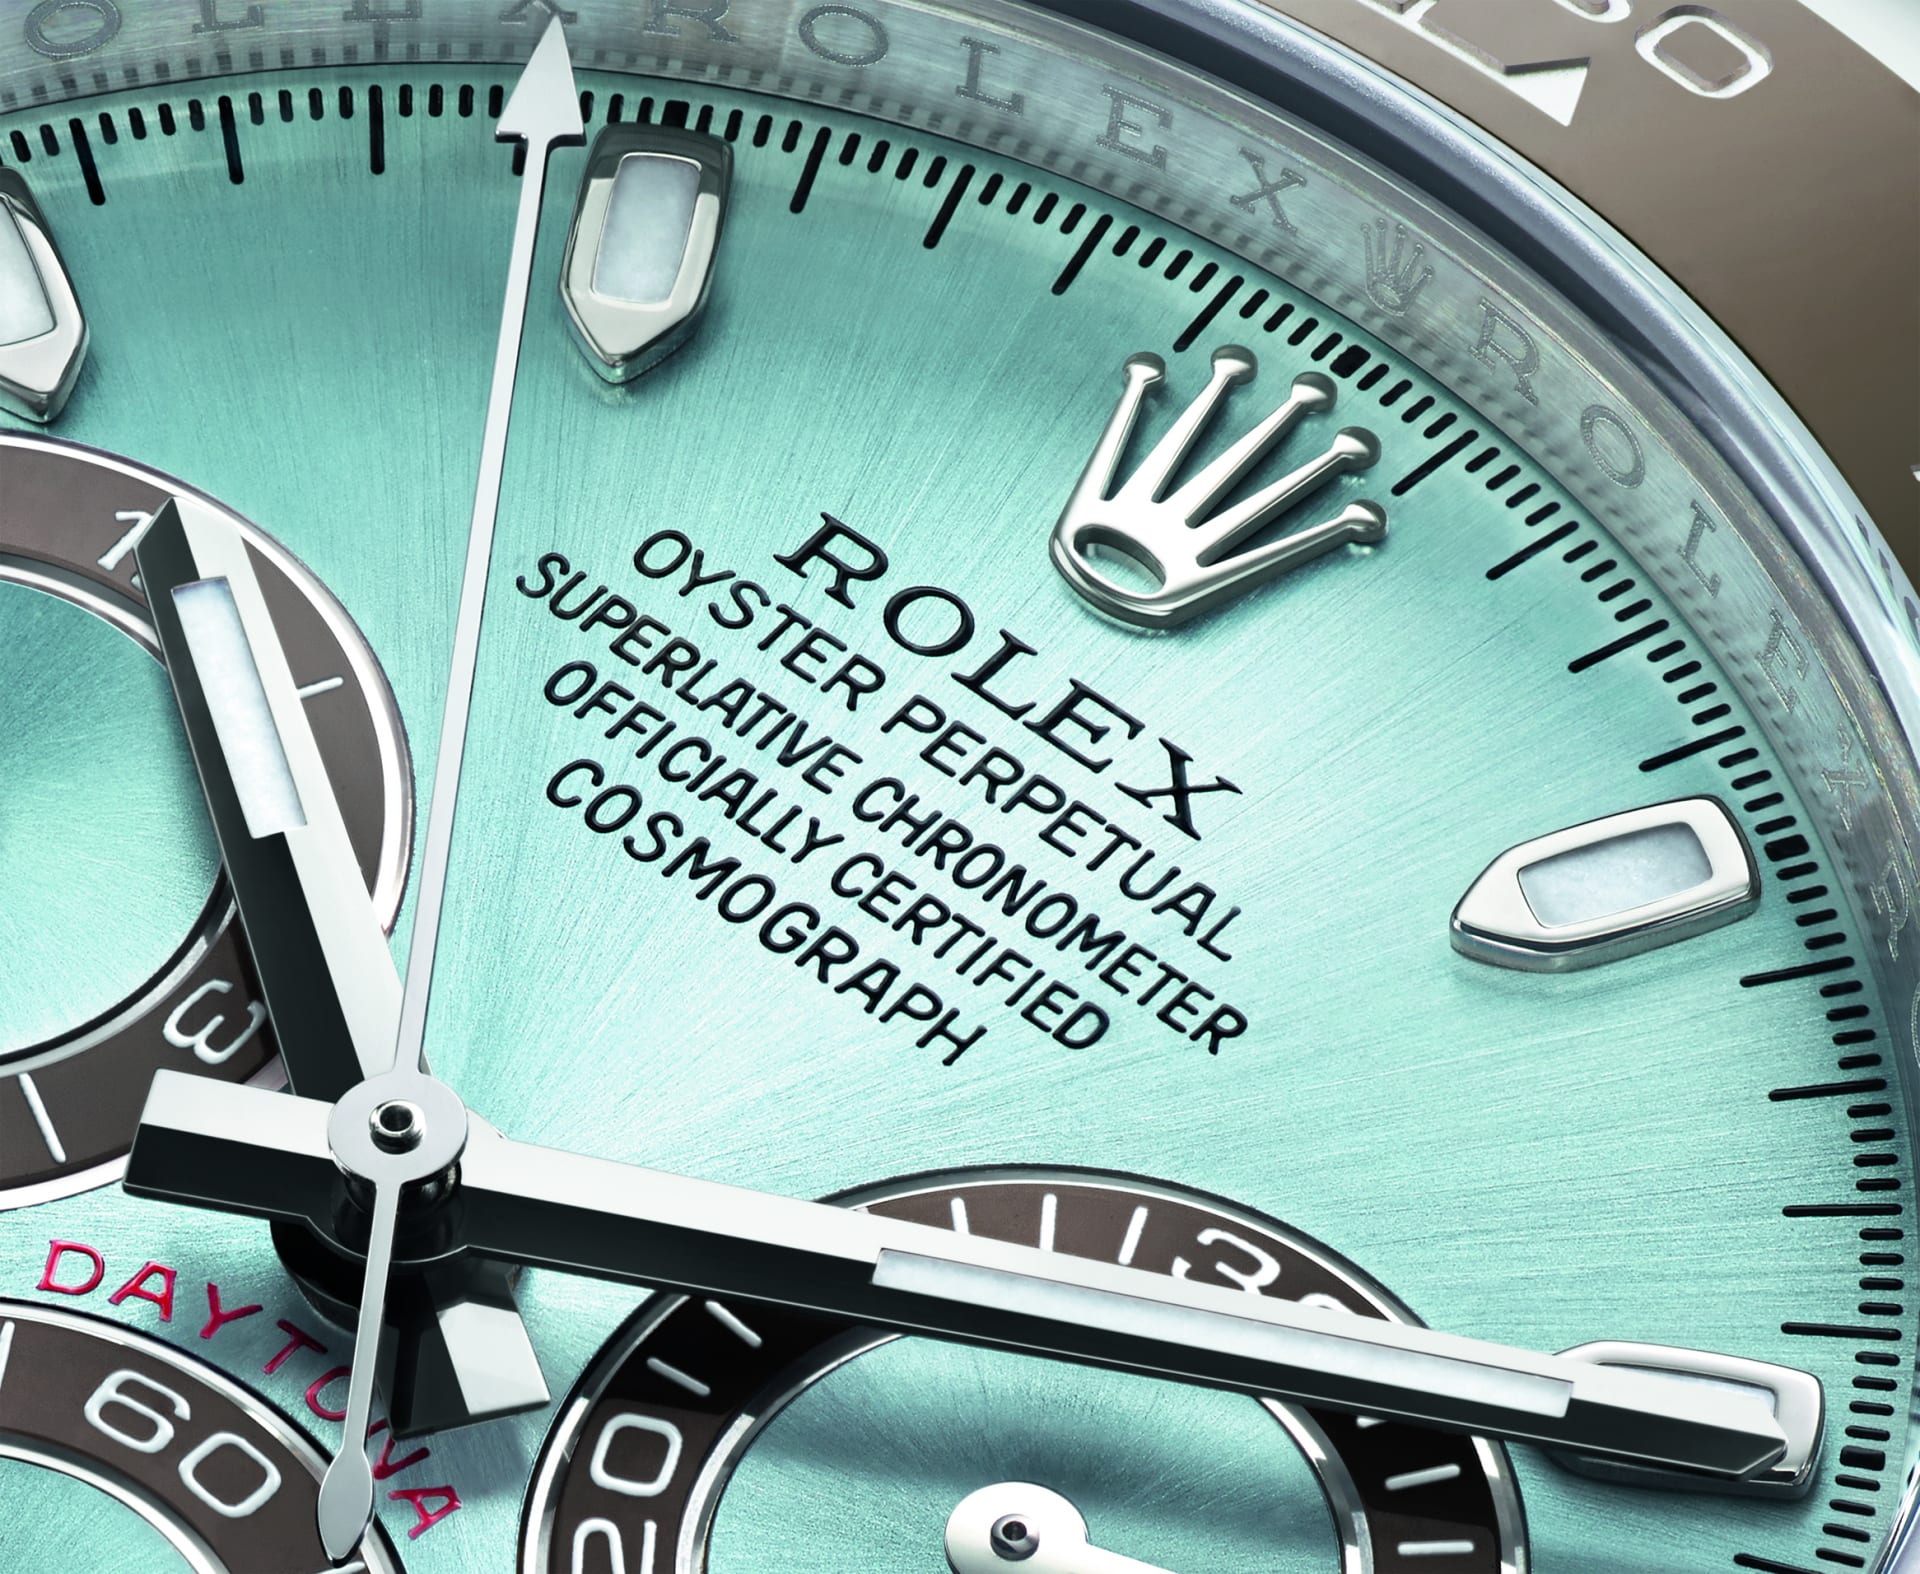 Why Rolex Daytona Became The World's Hottest Watch And To Buy One